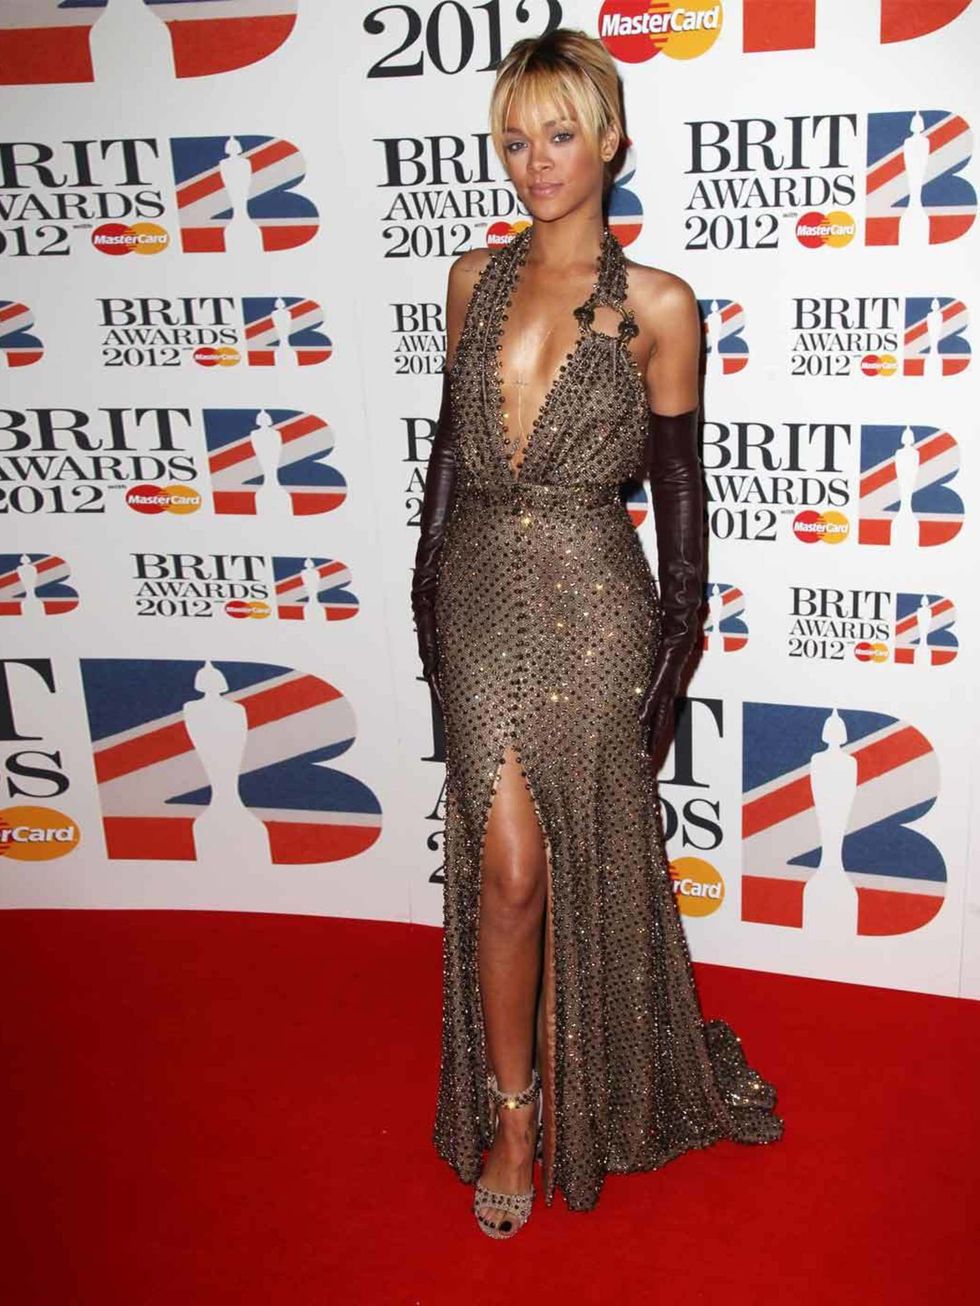 <p><a href="http://www.elleuk.com/star-style/celebrity-style-files/rihanna">Rihanna</a> hits the red carpet in <a href="http://www.elleuk.com/catwalk/designer-a-z/givenchy/couture-ss-2012">Givenchy Haute Couture by Riccardo Tisci</a> at the 2012 Brit Awar